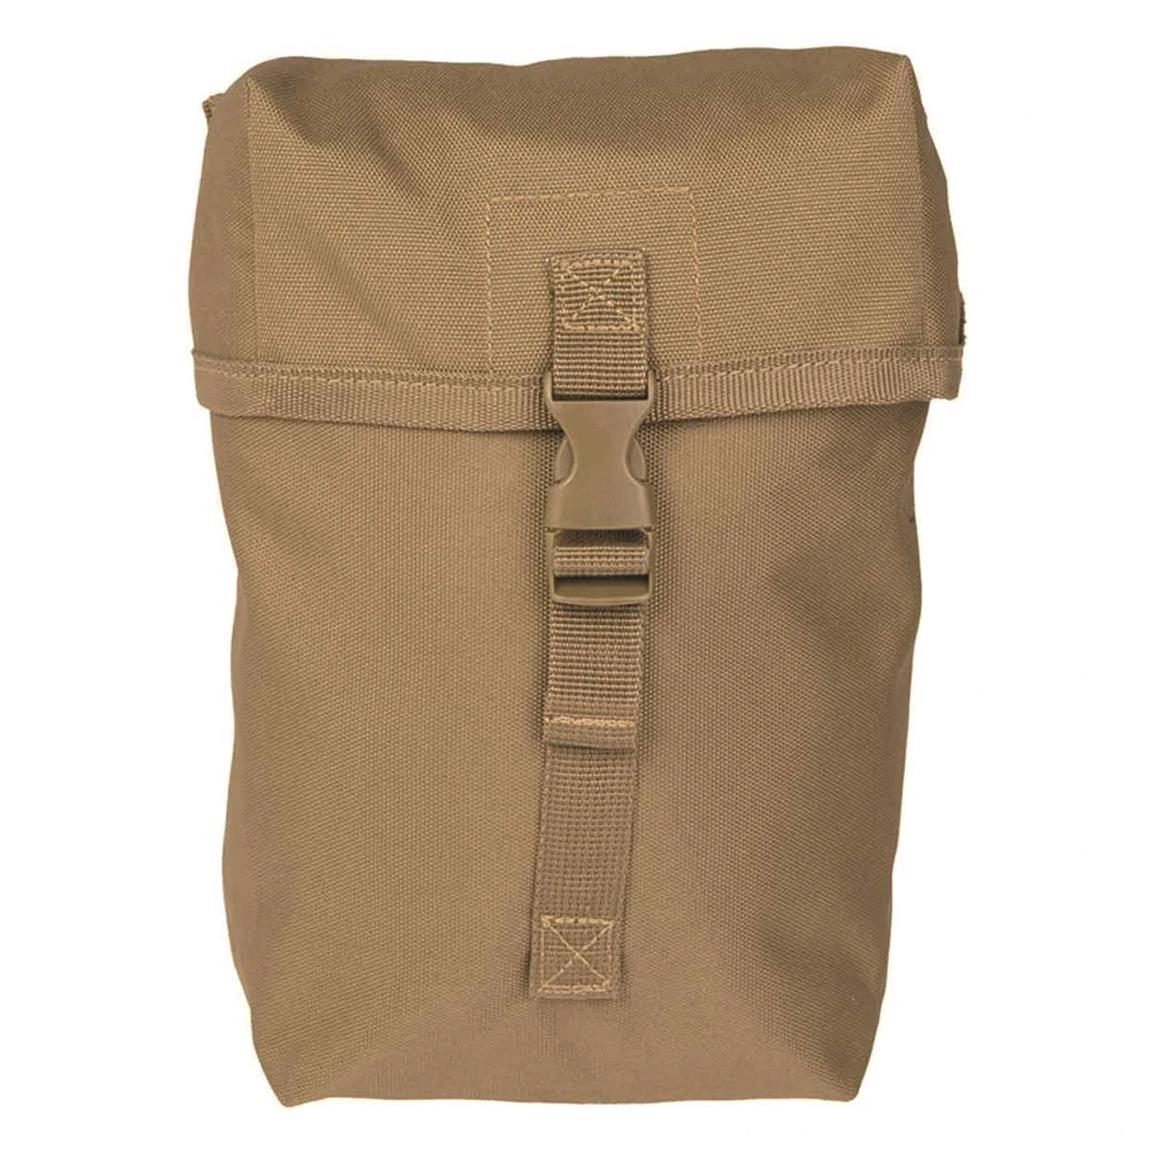 Mil-Tec Large MOLLE Utility Pouch, Coyote